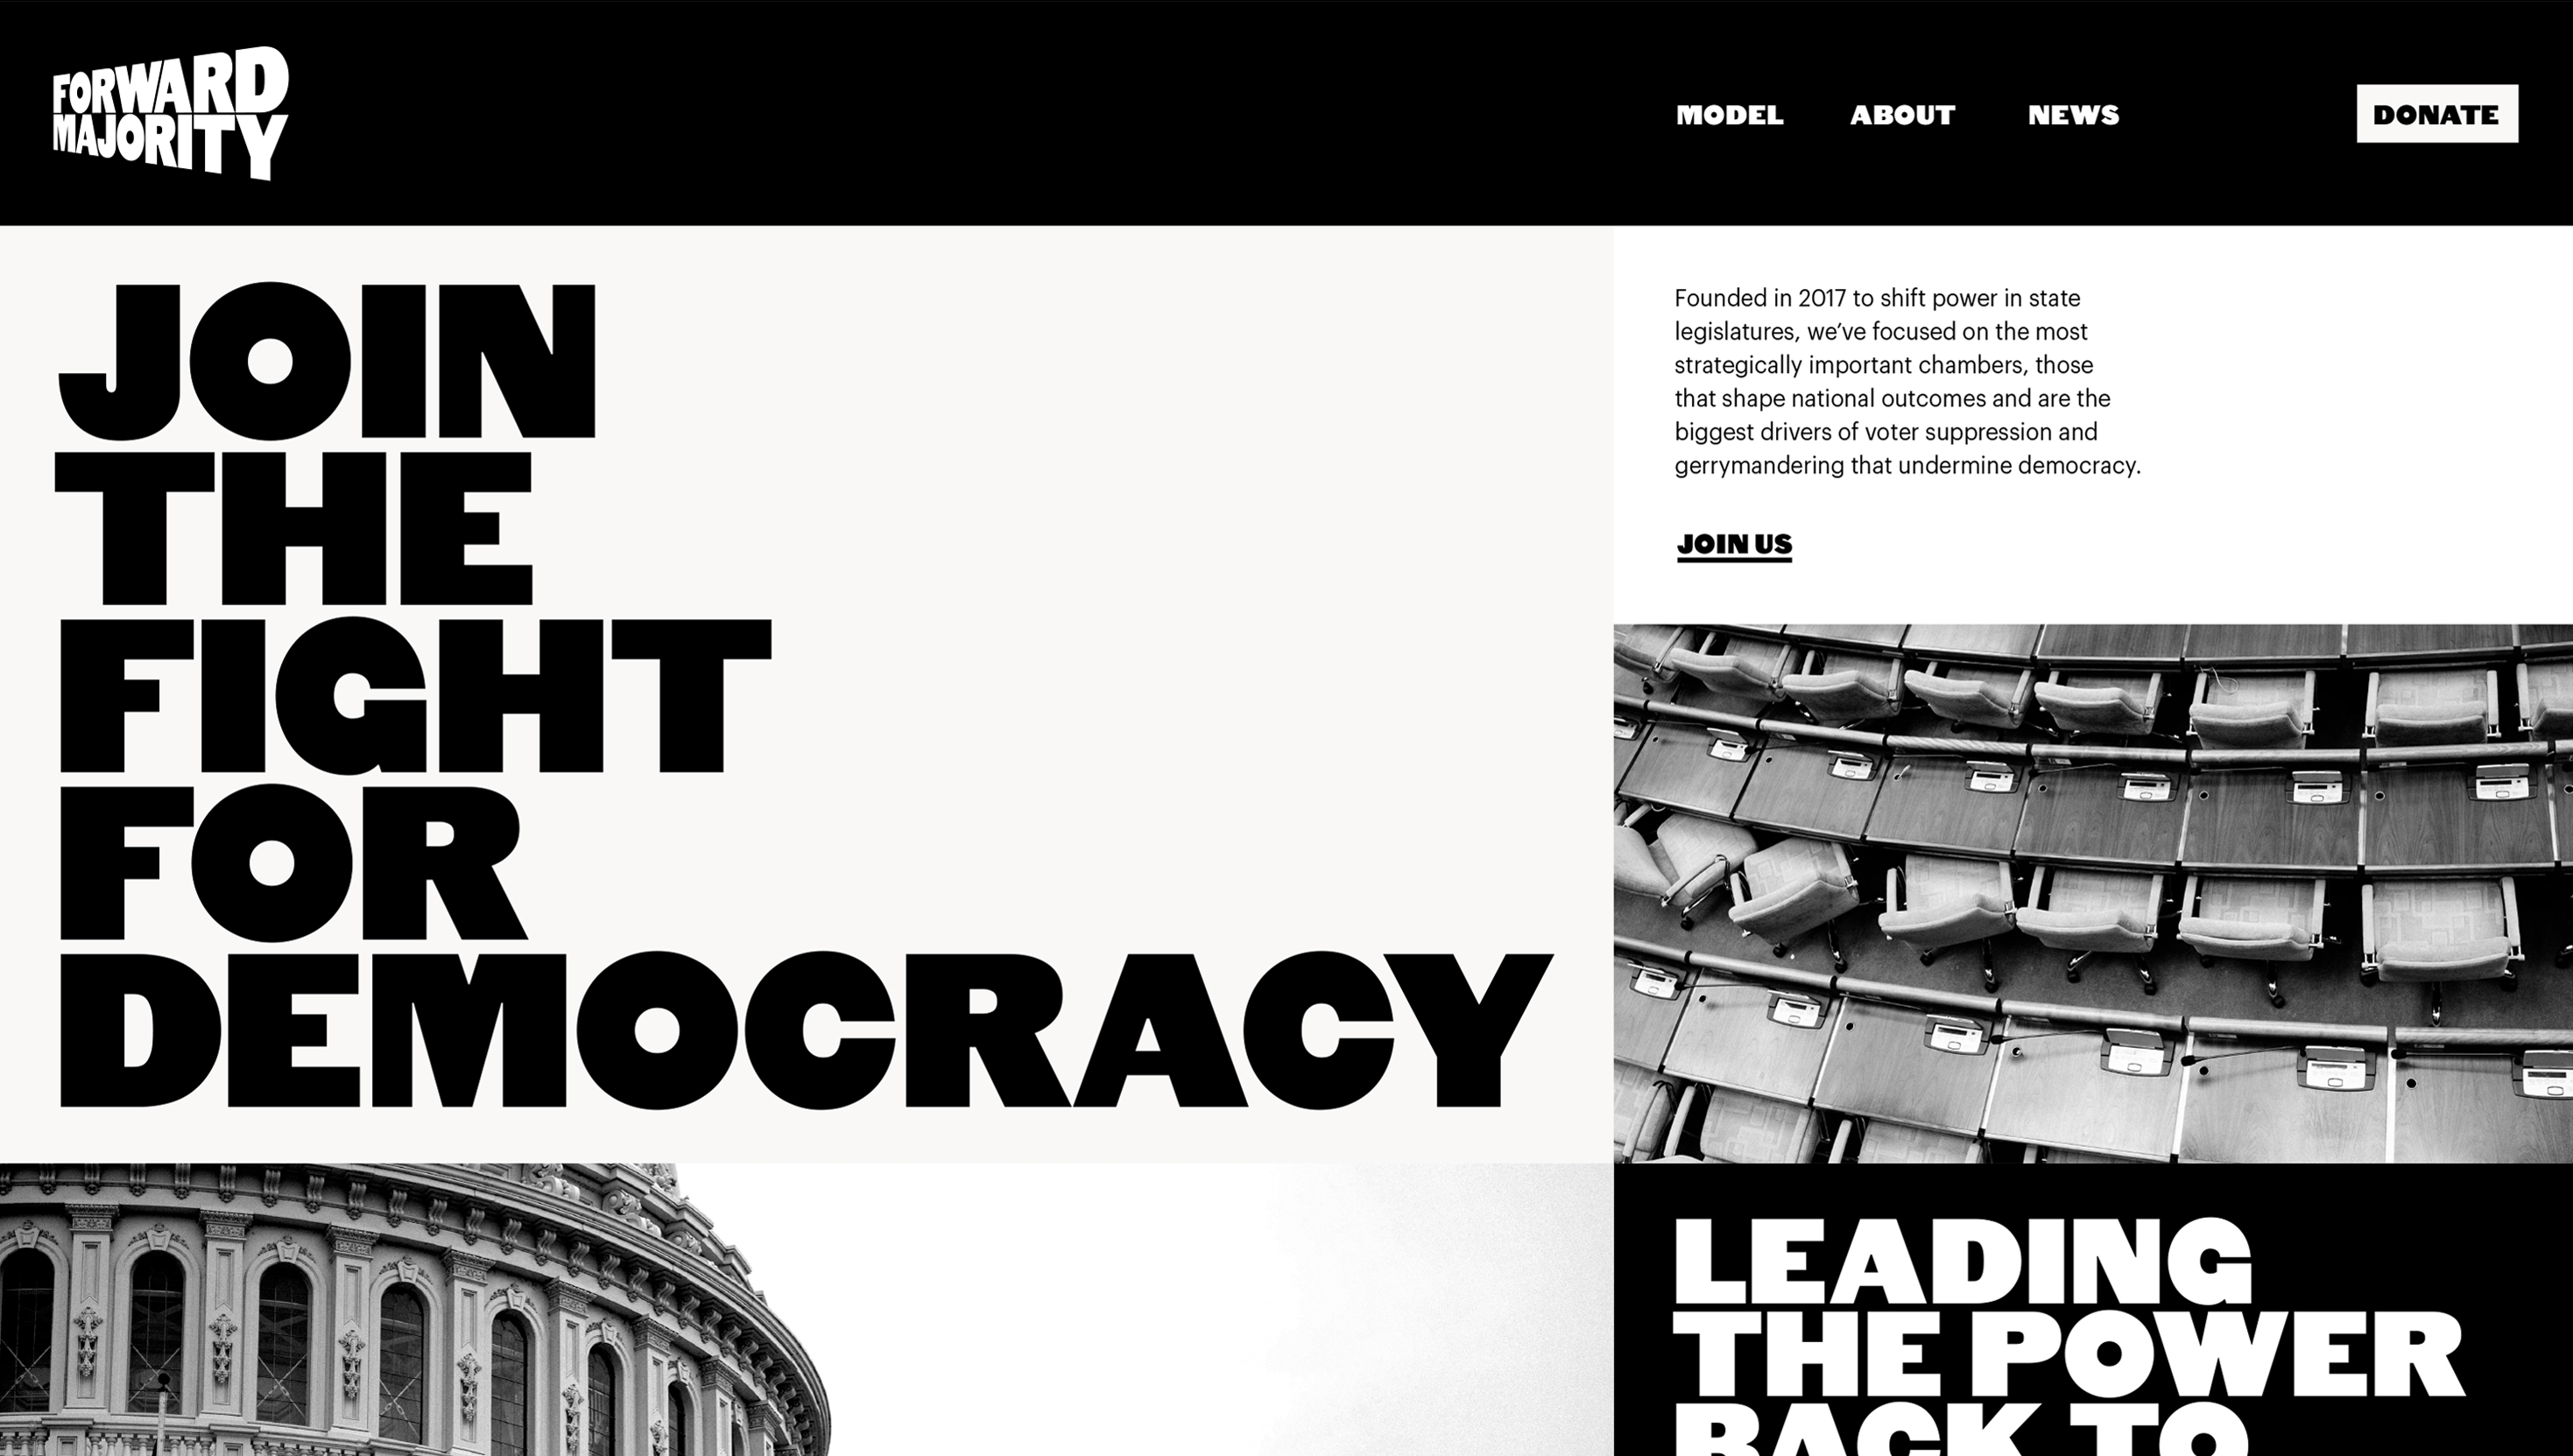 Visual identity and digital design for political action committee Forward Majority designed by Order